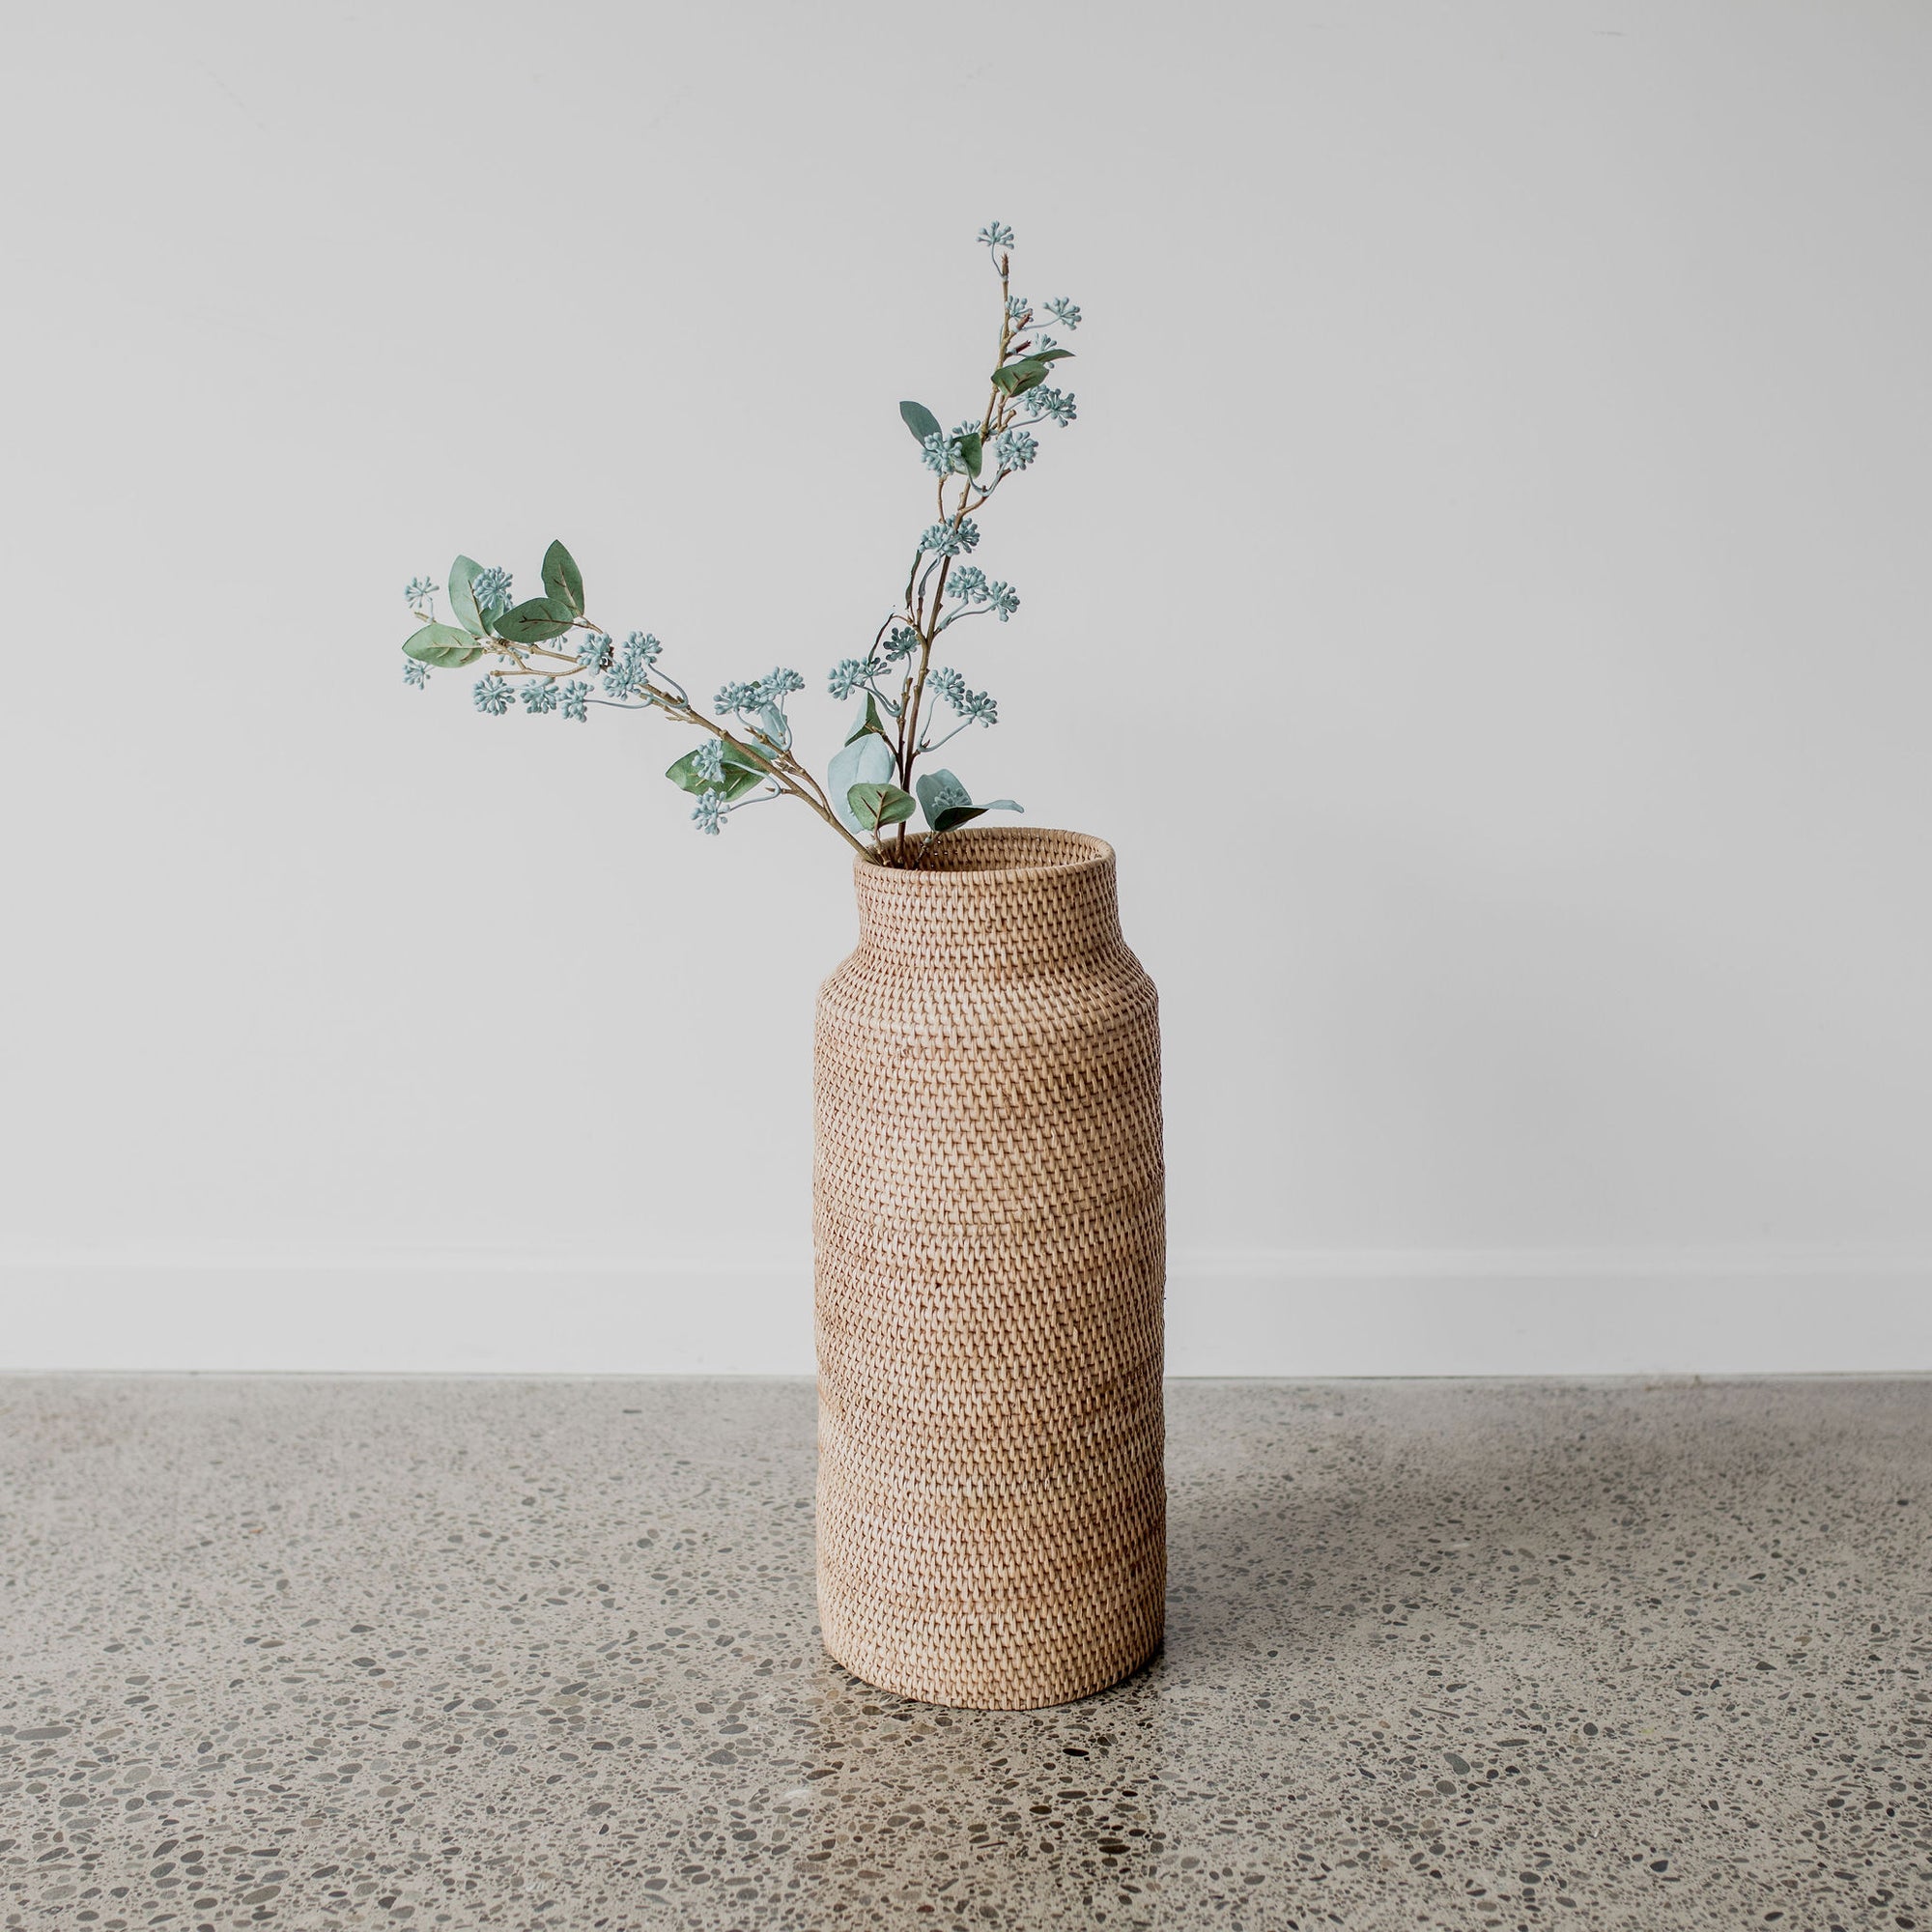 faux foliage stem by corcovado furniture store new zealand